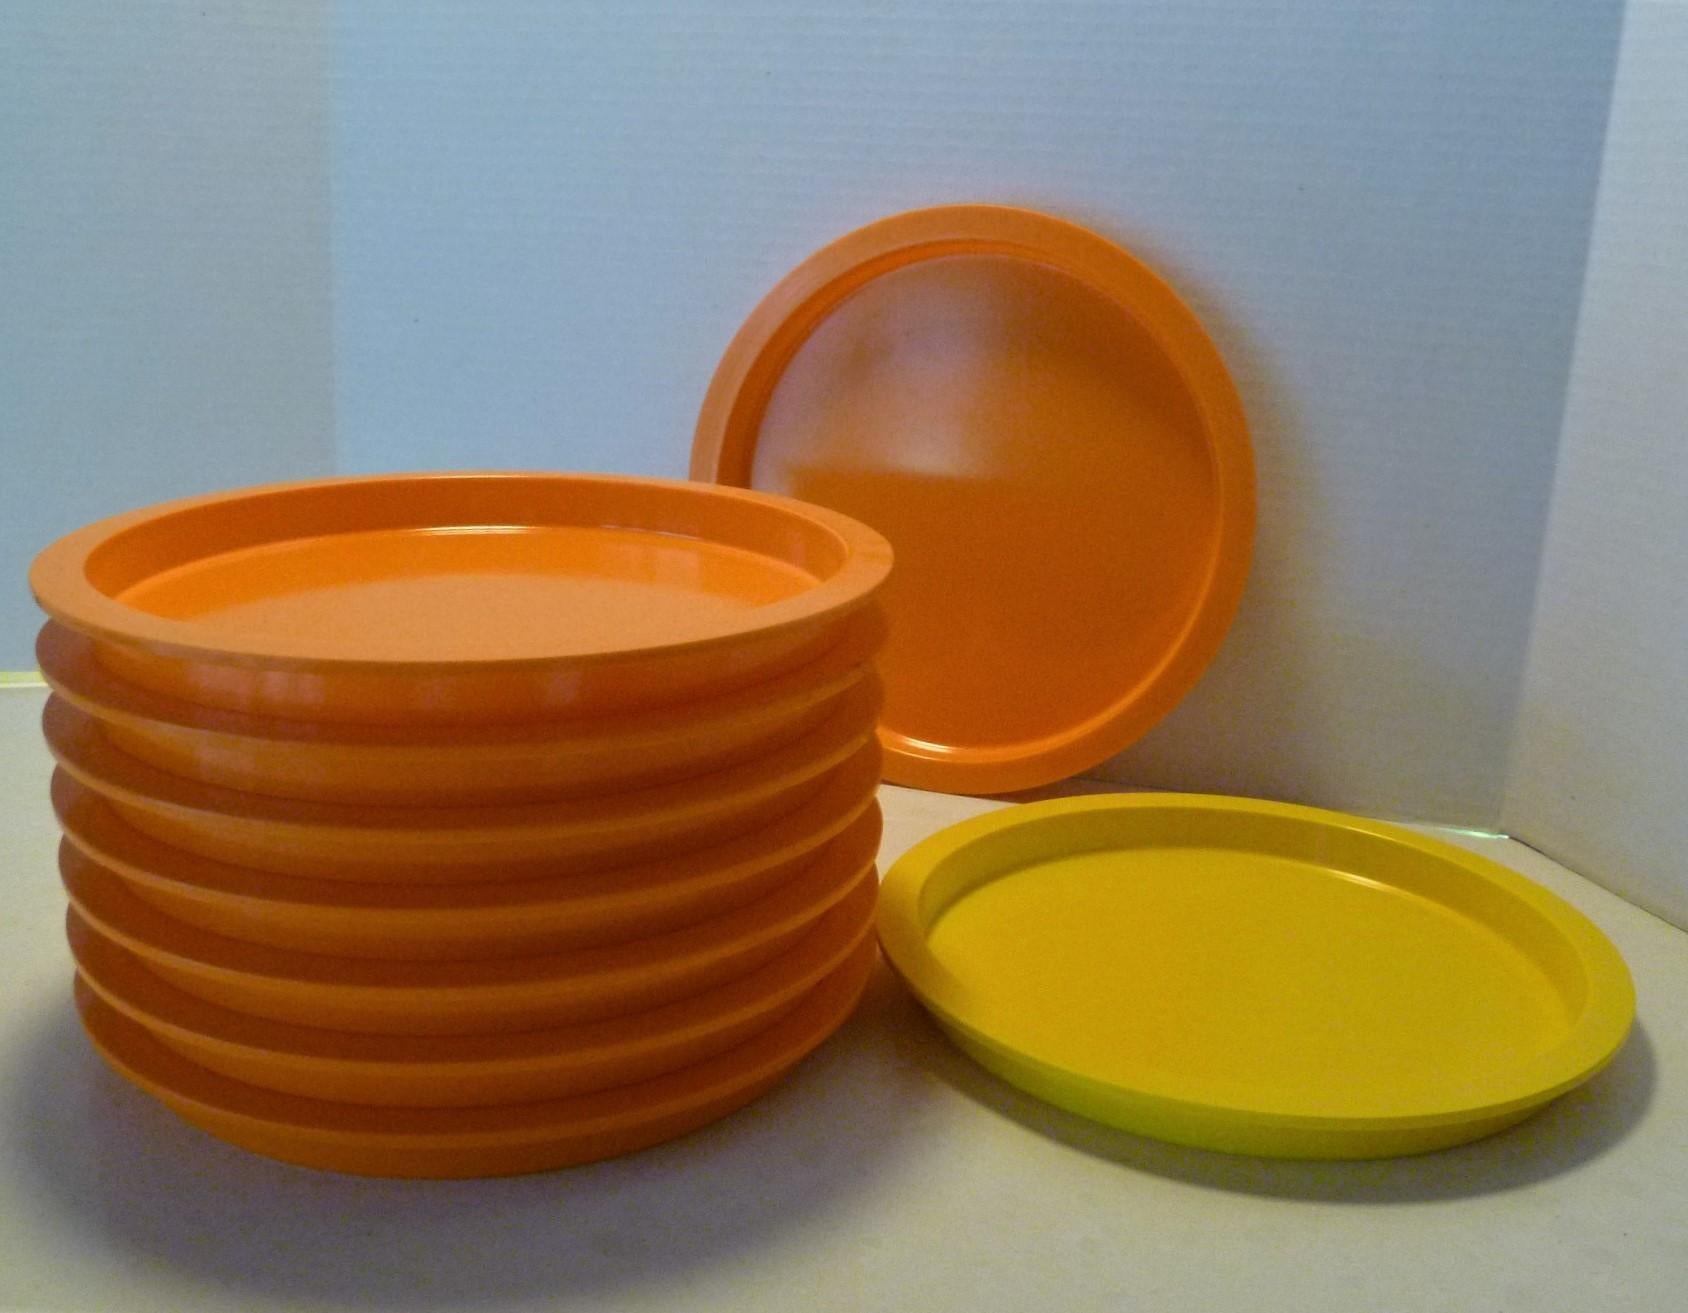 Swedish modern stackable melamine dishes in orange and yellow by Gunnar Cyren (1931-2013) for Dansk Designs 1970s. Set of 33 pcs. includes 9 dinner dishes (1 yellow), 16 lunch/salad/dessert dishes and 8 Bowls. Lovely Cantaloupe orange and canary